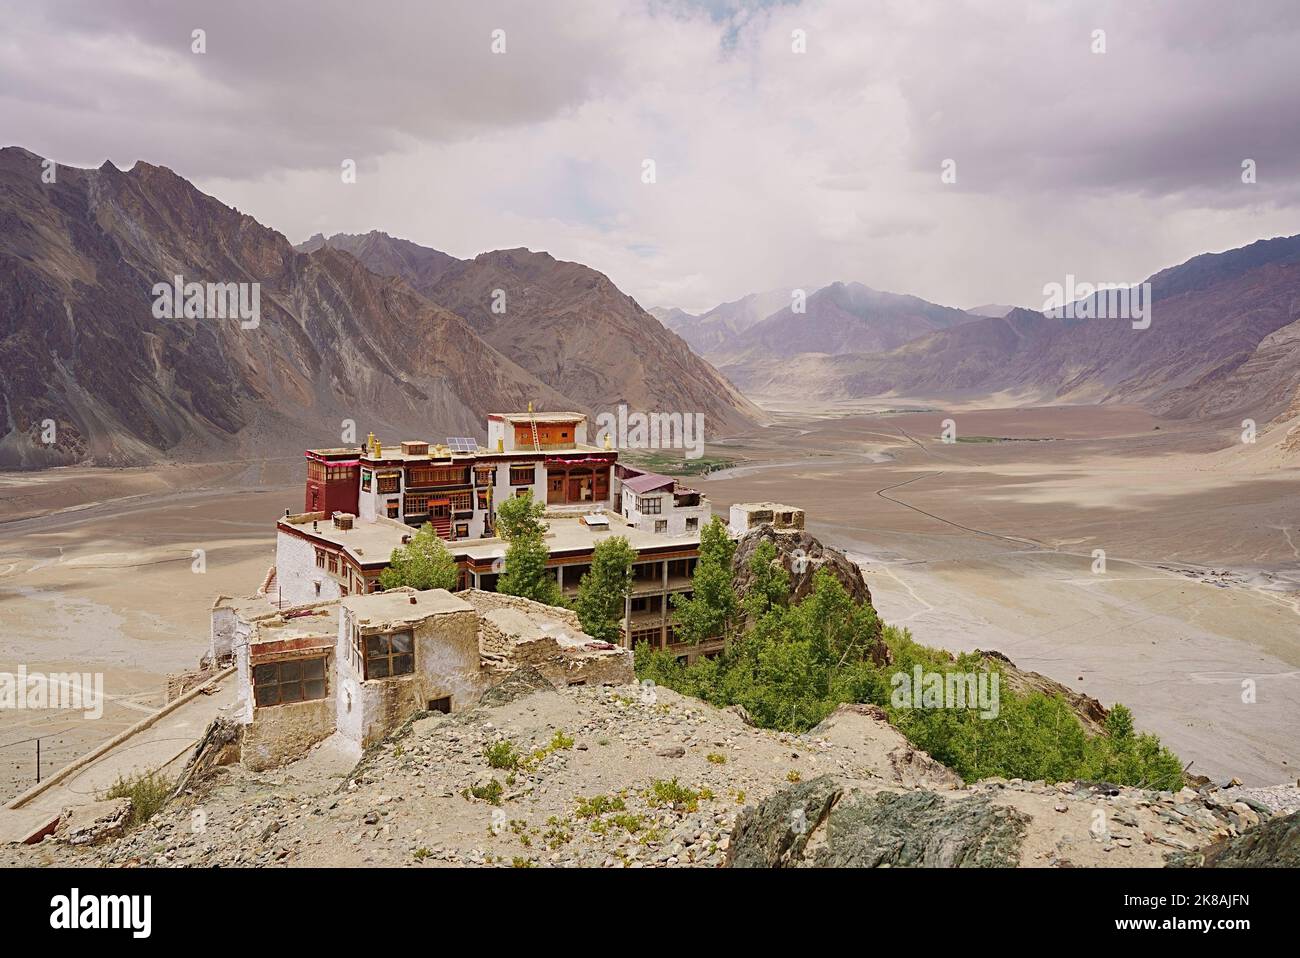 Stong Dae Monastery or Gompa is located strategically perched atop a mountain overlooking the Zanskar River Valley Stock Photo